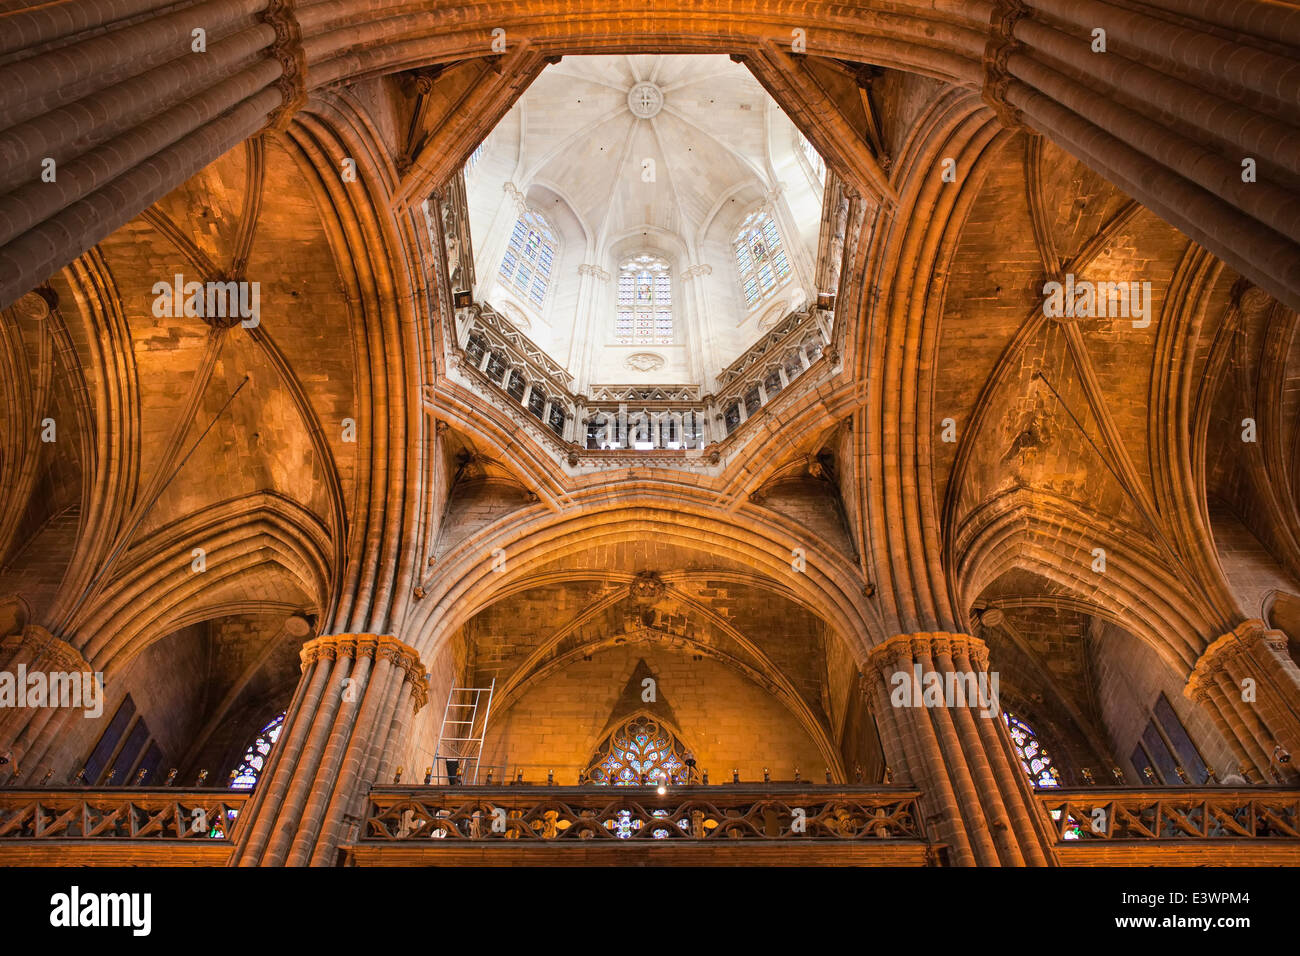 Gothic vaulted ceiling with dome of the Barcelona Cathedral in Catalonia, Spain. Stock Photo